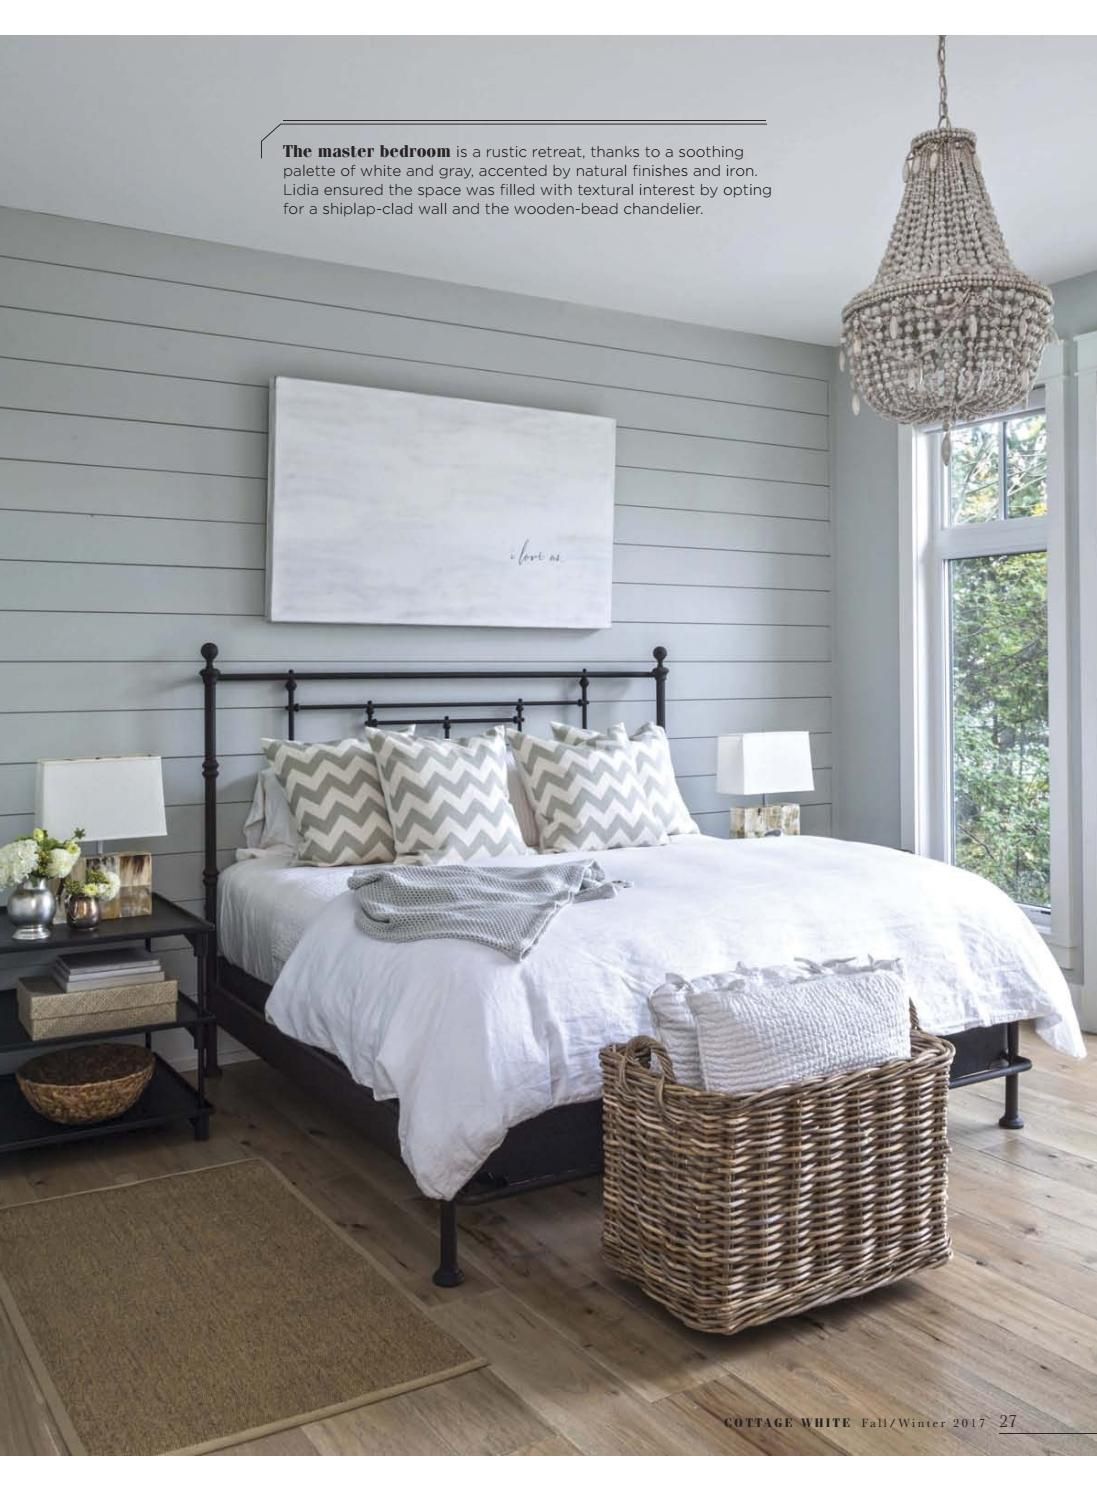 Timeless Charm: Vintage And Antique Elements In Bedroom Accent Wall Decor